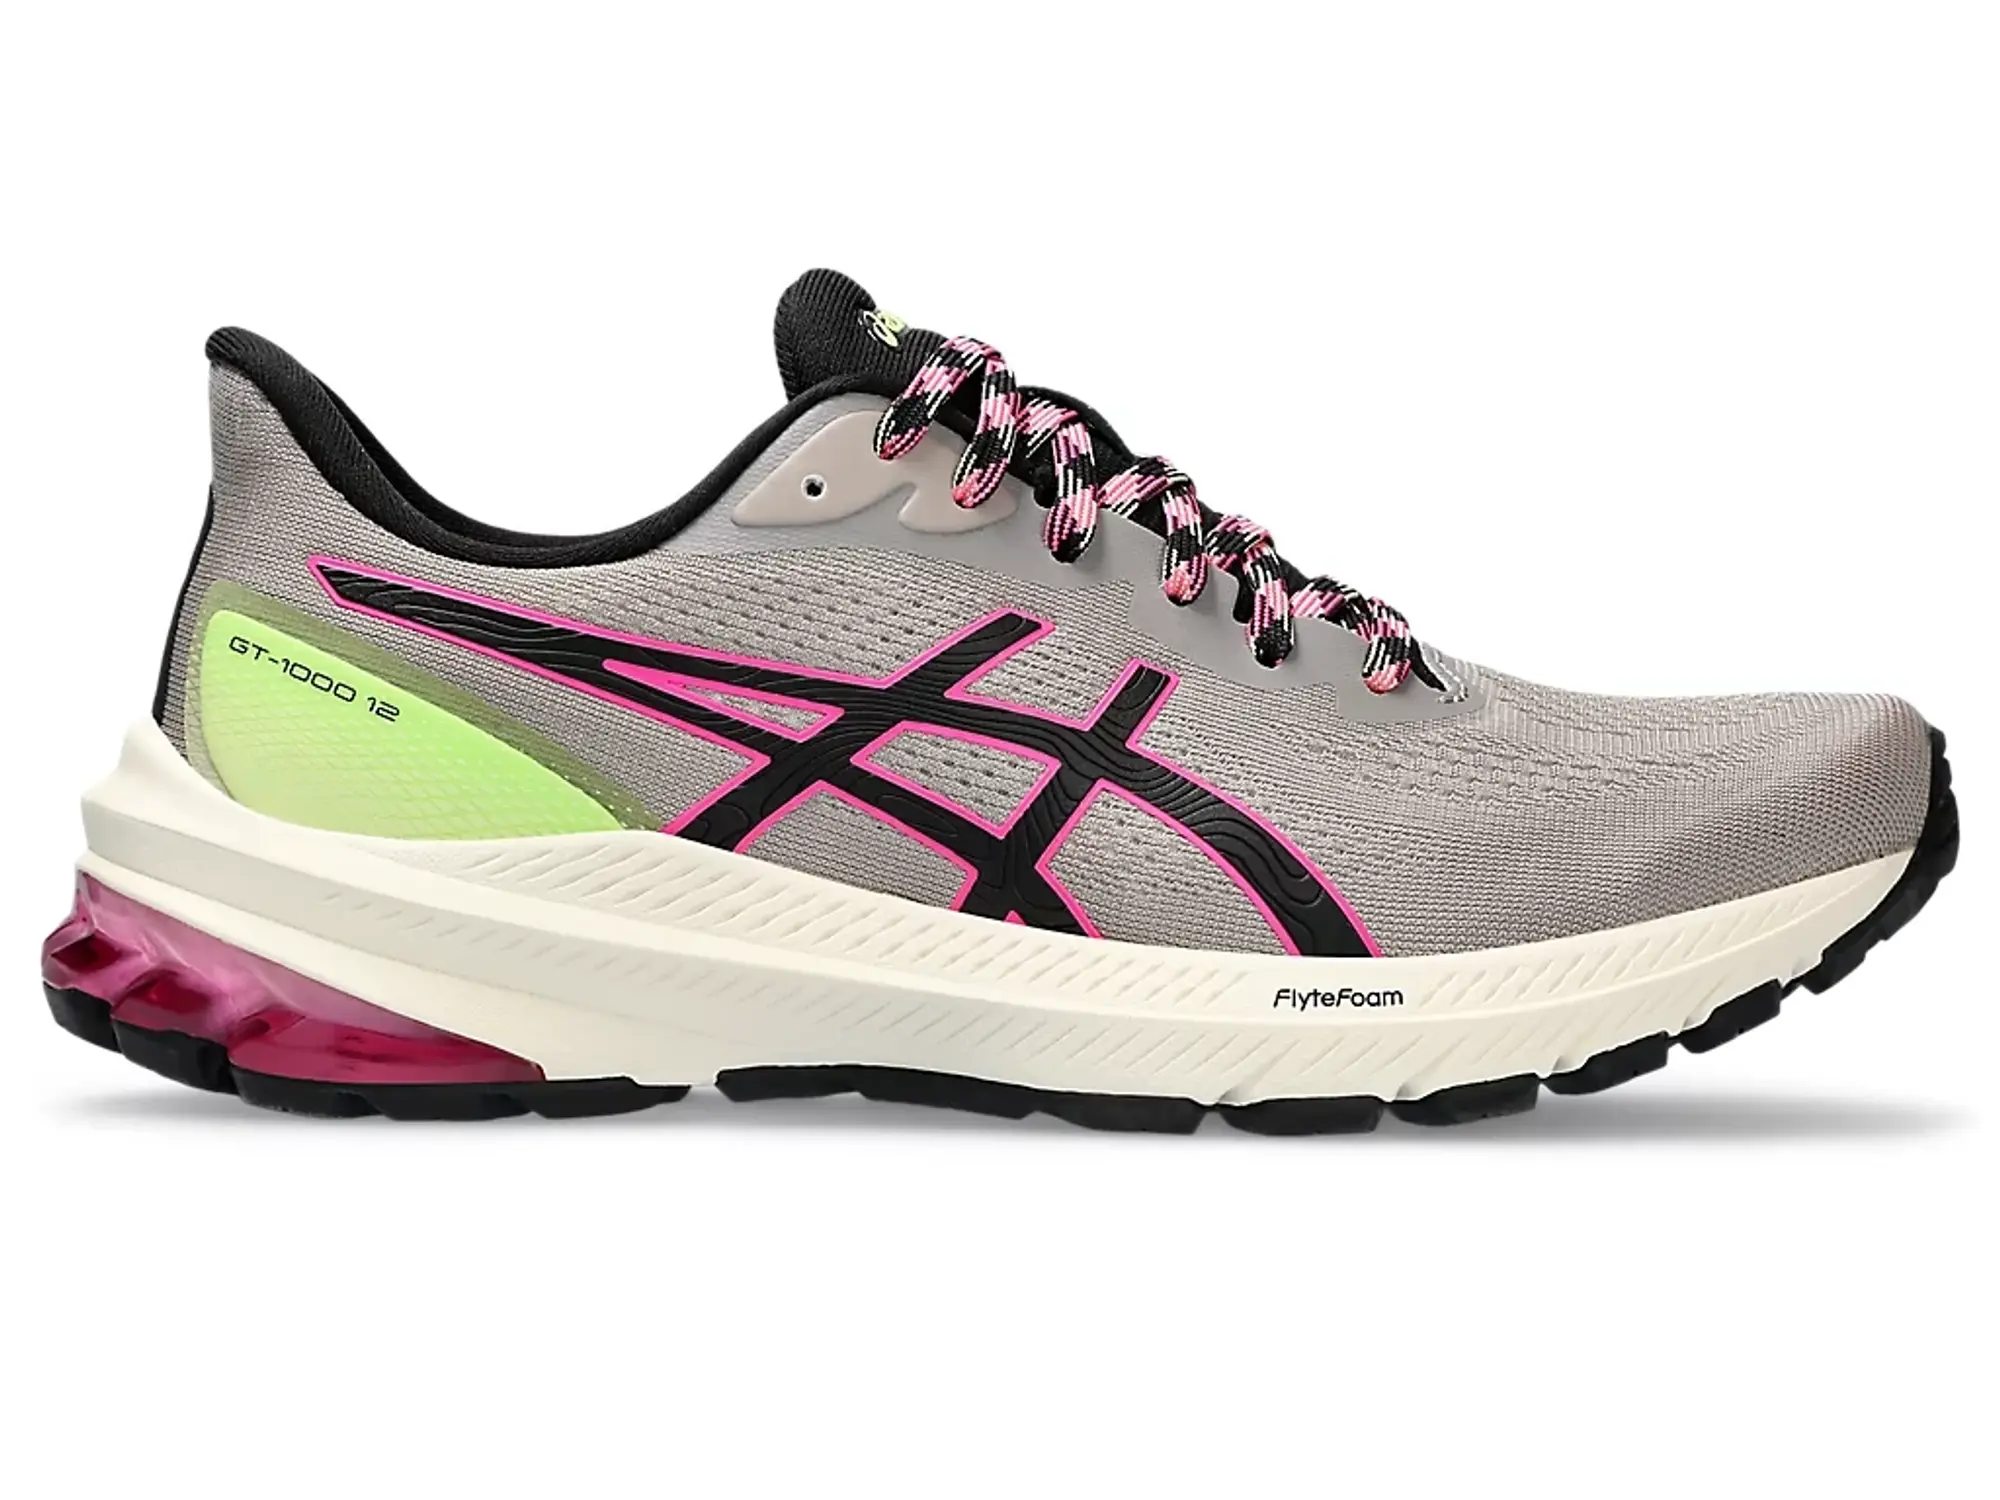 Asics Gt-1000 12 Tr Trail Running Stability Trainers In Grey And Pink-Multi